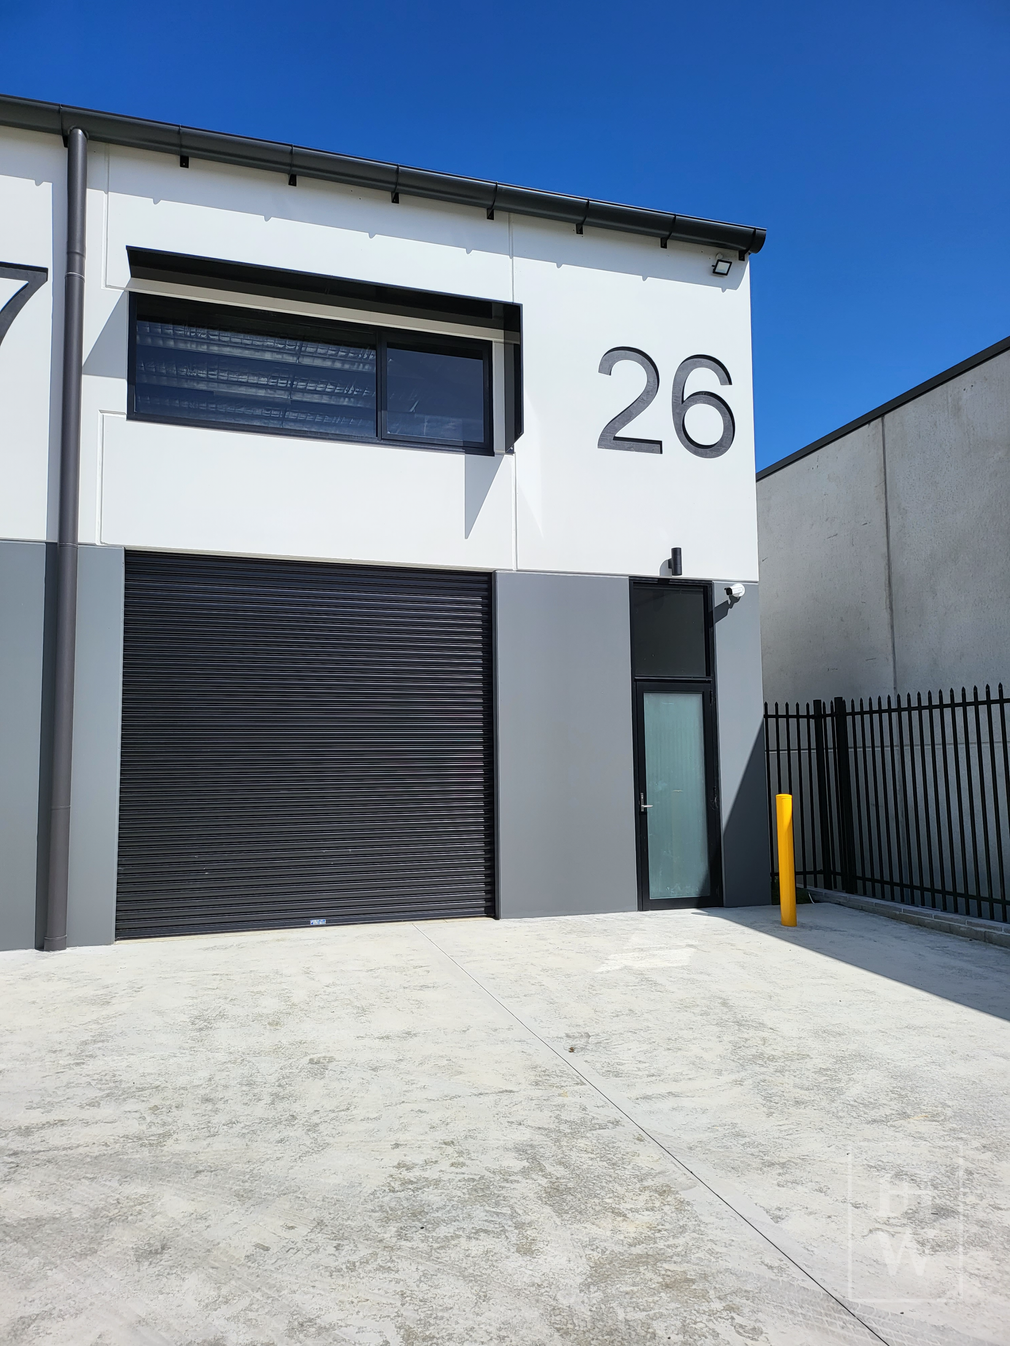 26/6-10 Owen Street, Mittagong NSW 2575 - Leased Factory, Warehouse ...